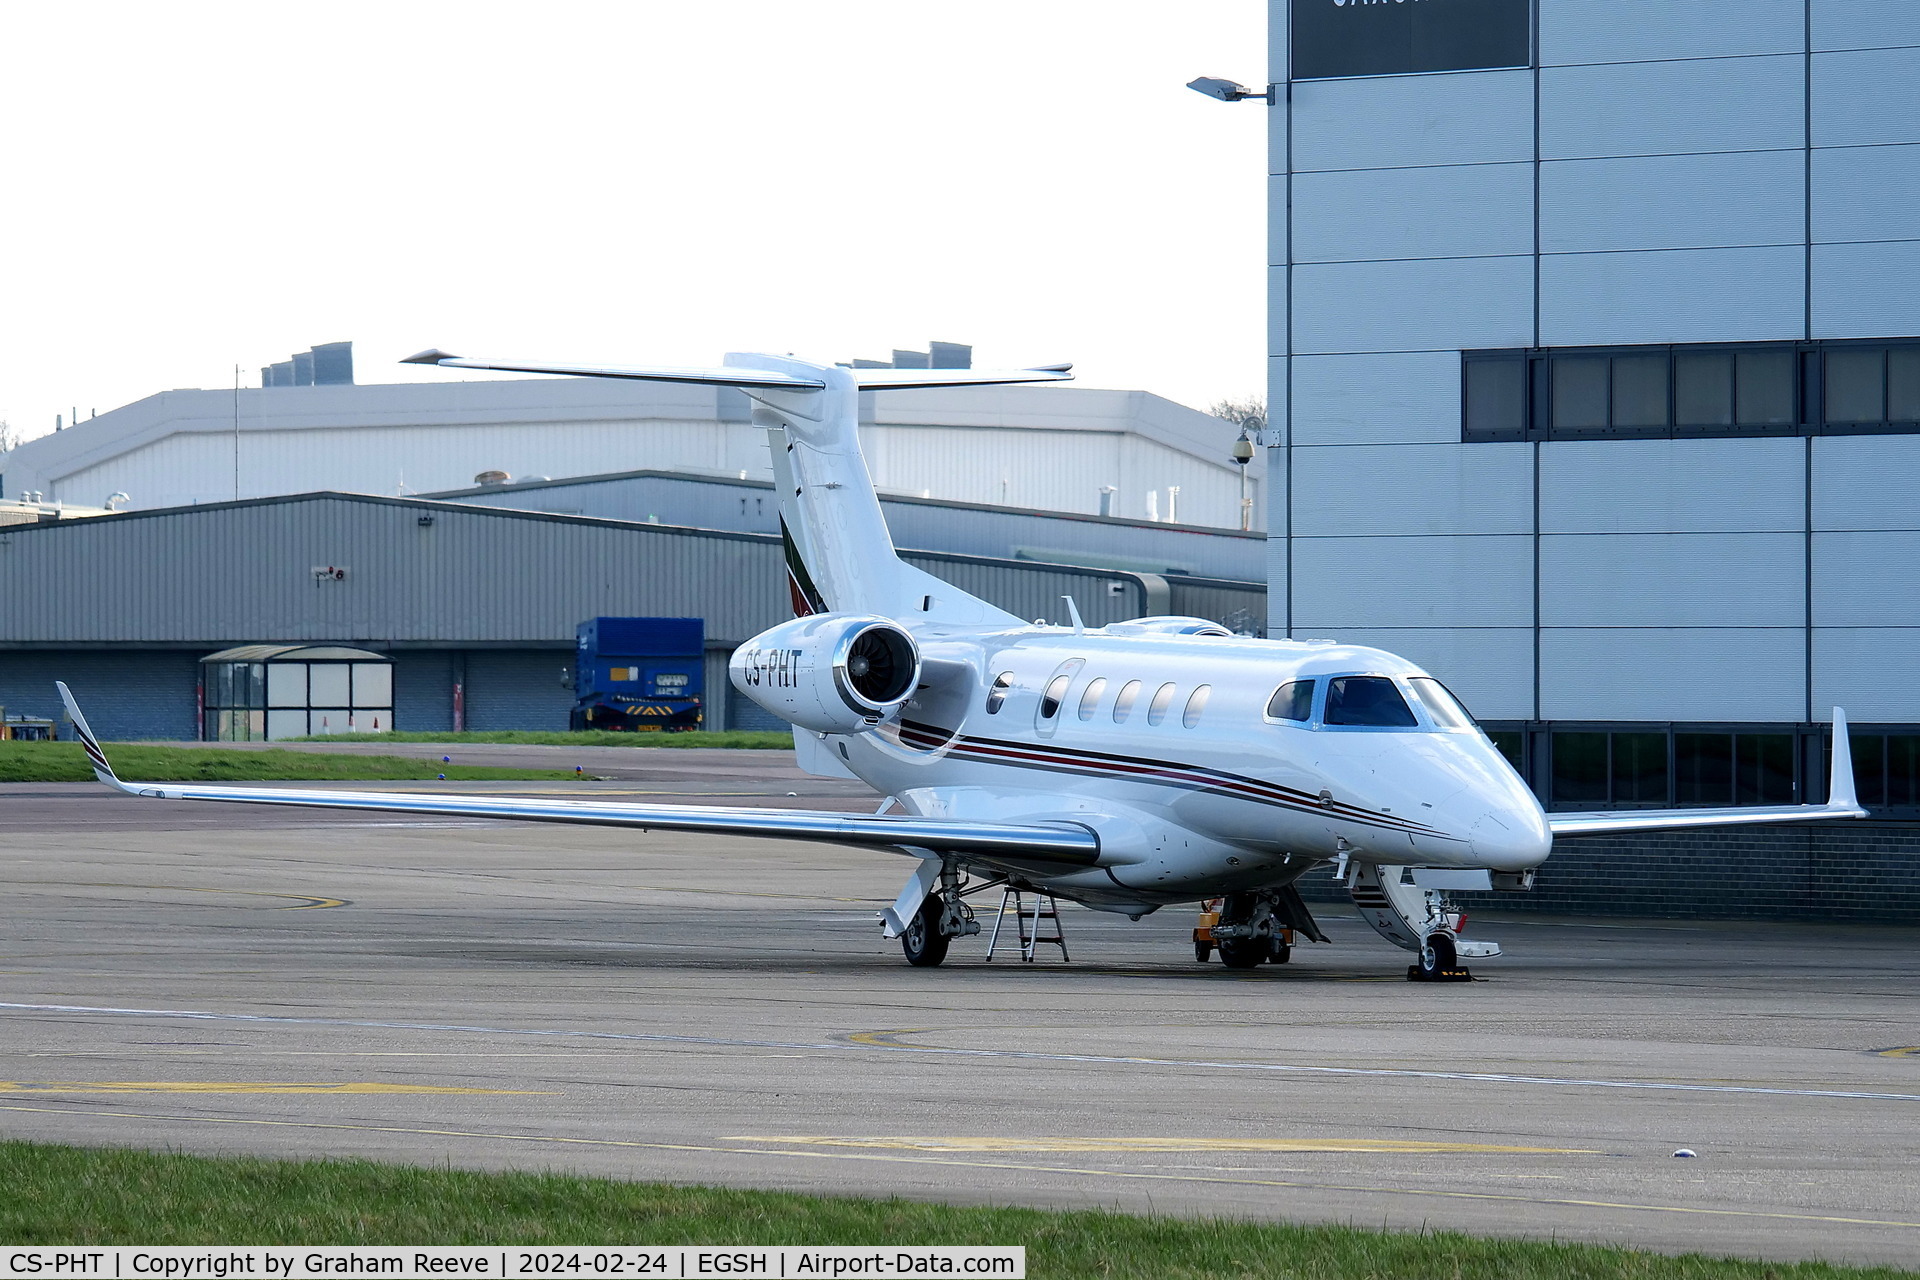 CS-PHT, 2022 Embraer EMB-505 Phenom 300 C/N 50500656, Parked at Norwich.